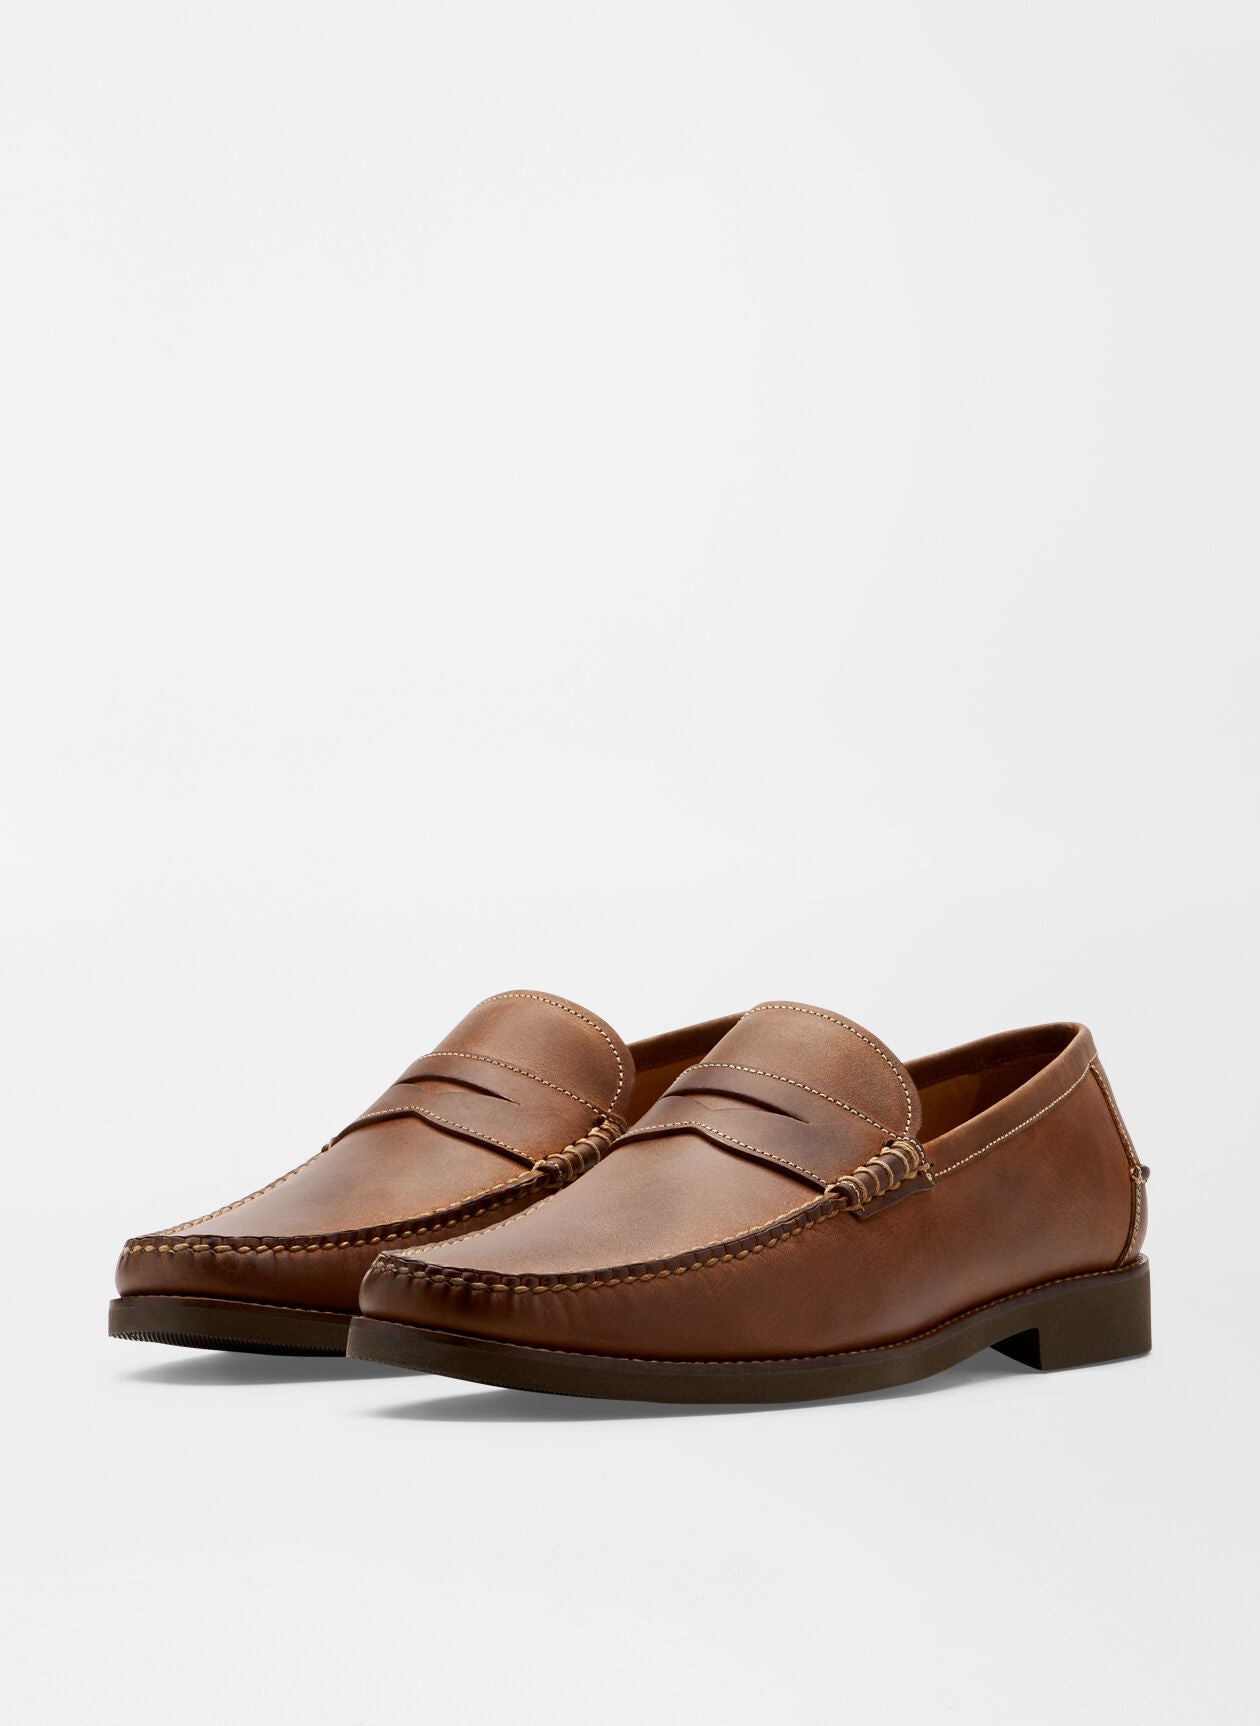 HANDSEWN LEATHER PENNY LOAFER - WHISKEY